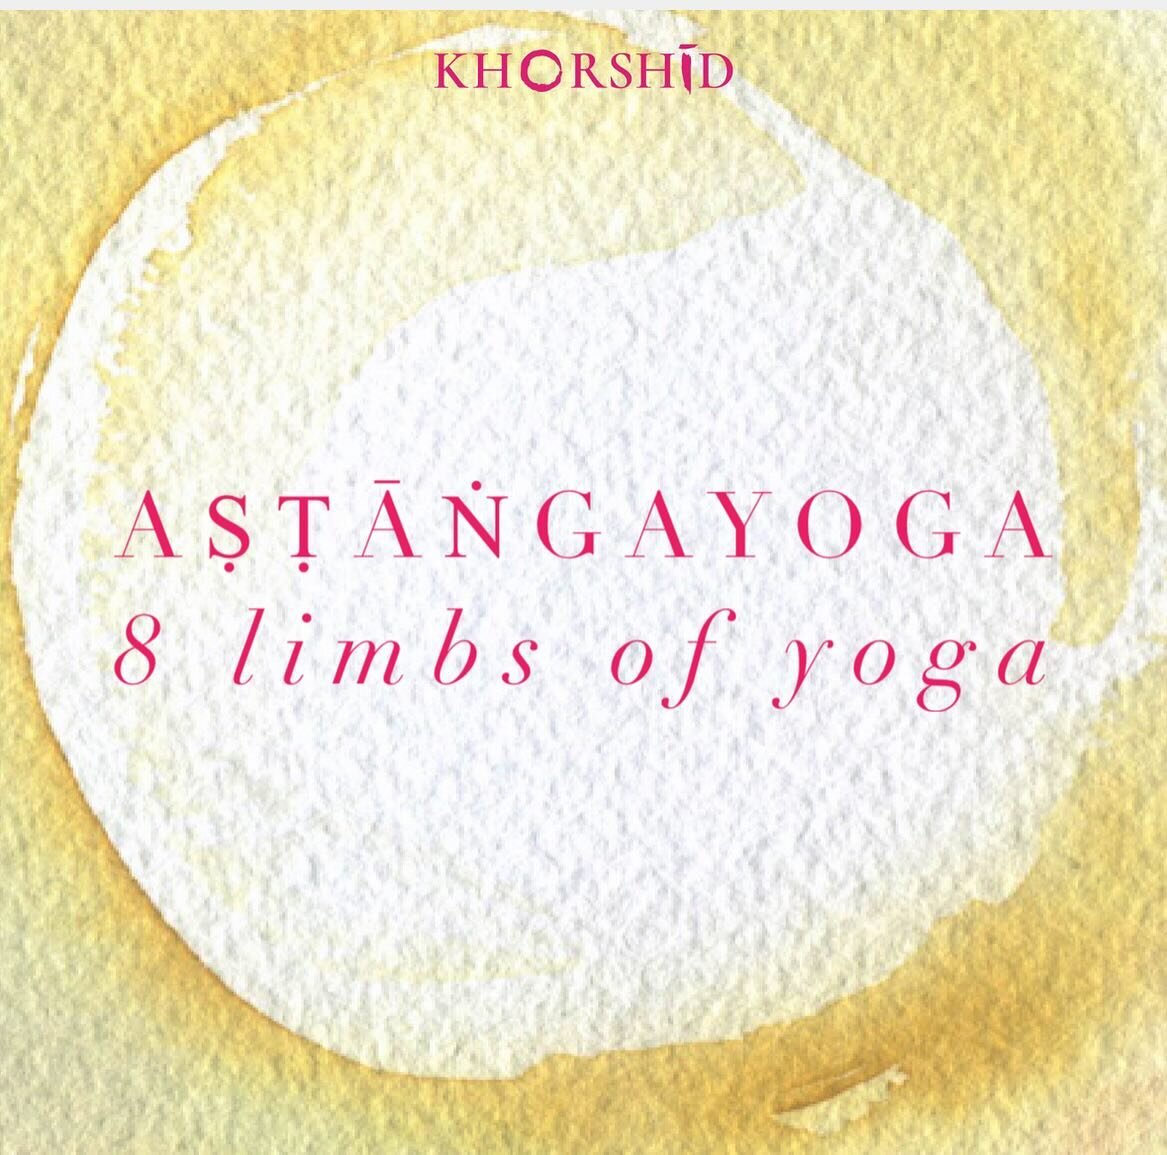 Sanskrit: अष्टाङ्गयोग, romanized: aṣṭāṅgayoga&ldquo;the eight limbs of yoga&rdquo;is Patanjali&rsquo;s classification of classical yoga, as set out in his Yoga Sutras. He defined the eight limbs as so: 

1- Yama &ndash; restraints or ethics of behavi